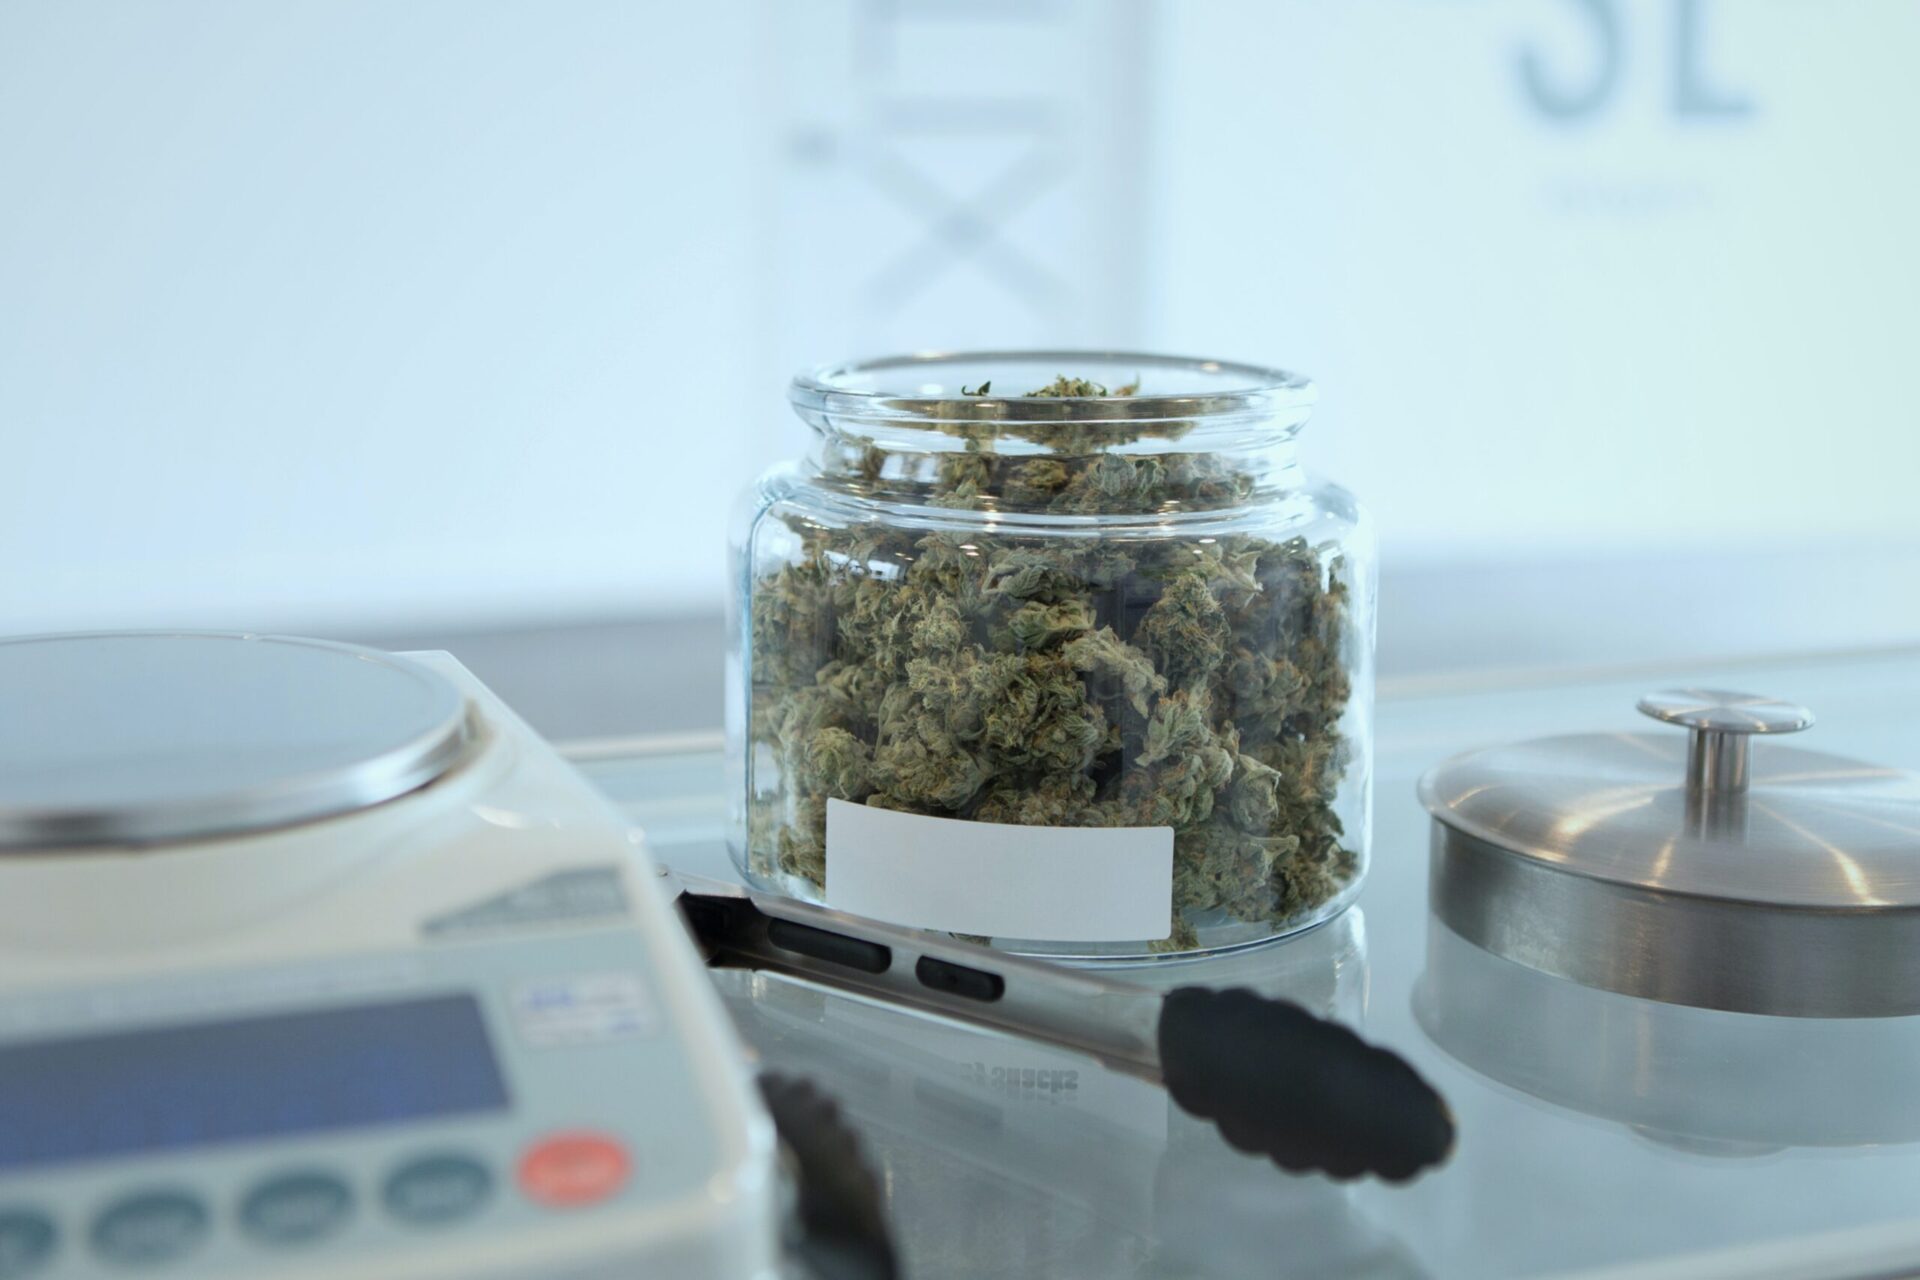 Inventory Management Software and the Cannabis Industry